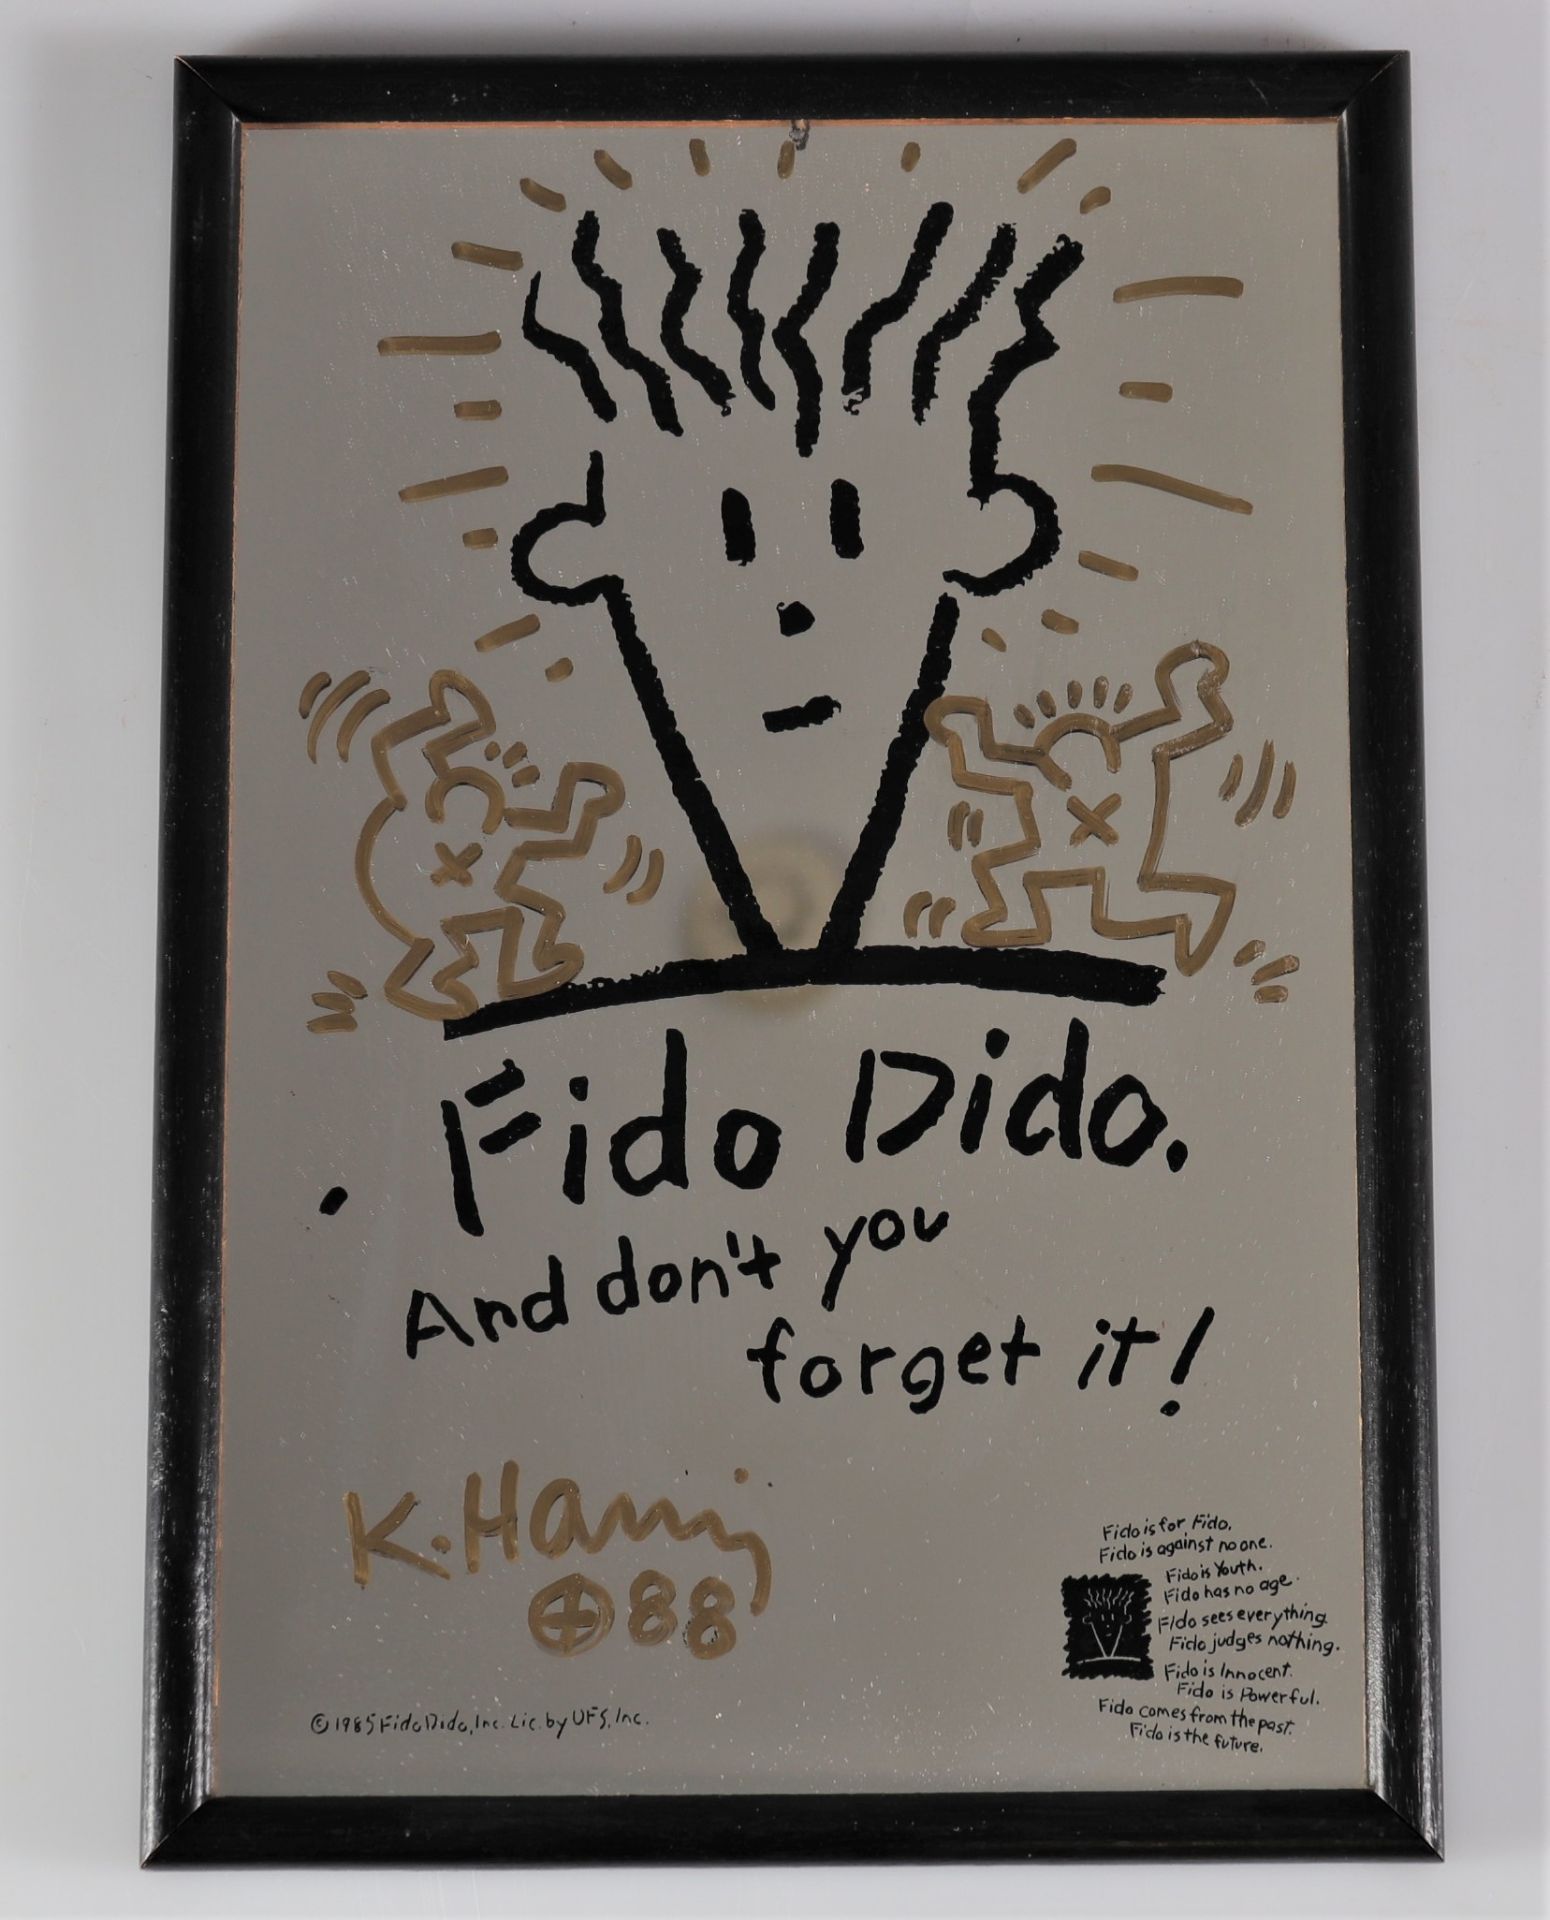 Keith Haring. â€œFido Dido. And don't you forget it! ". 1985. Black print on mirror. Enhanced with a